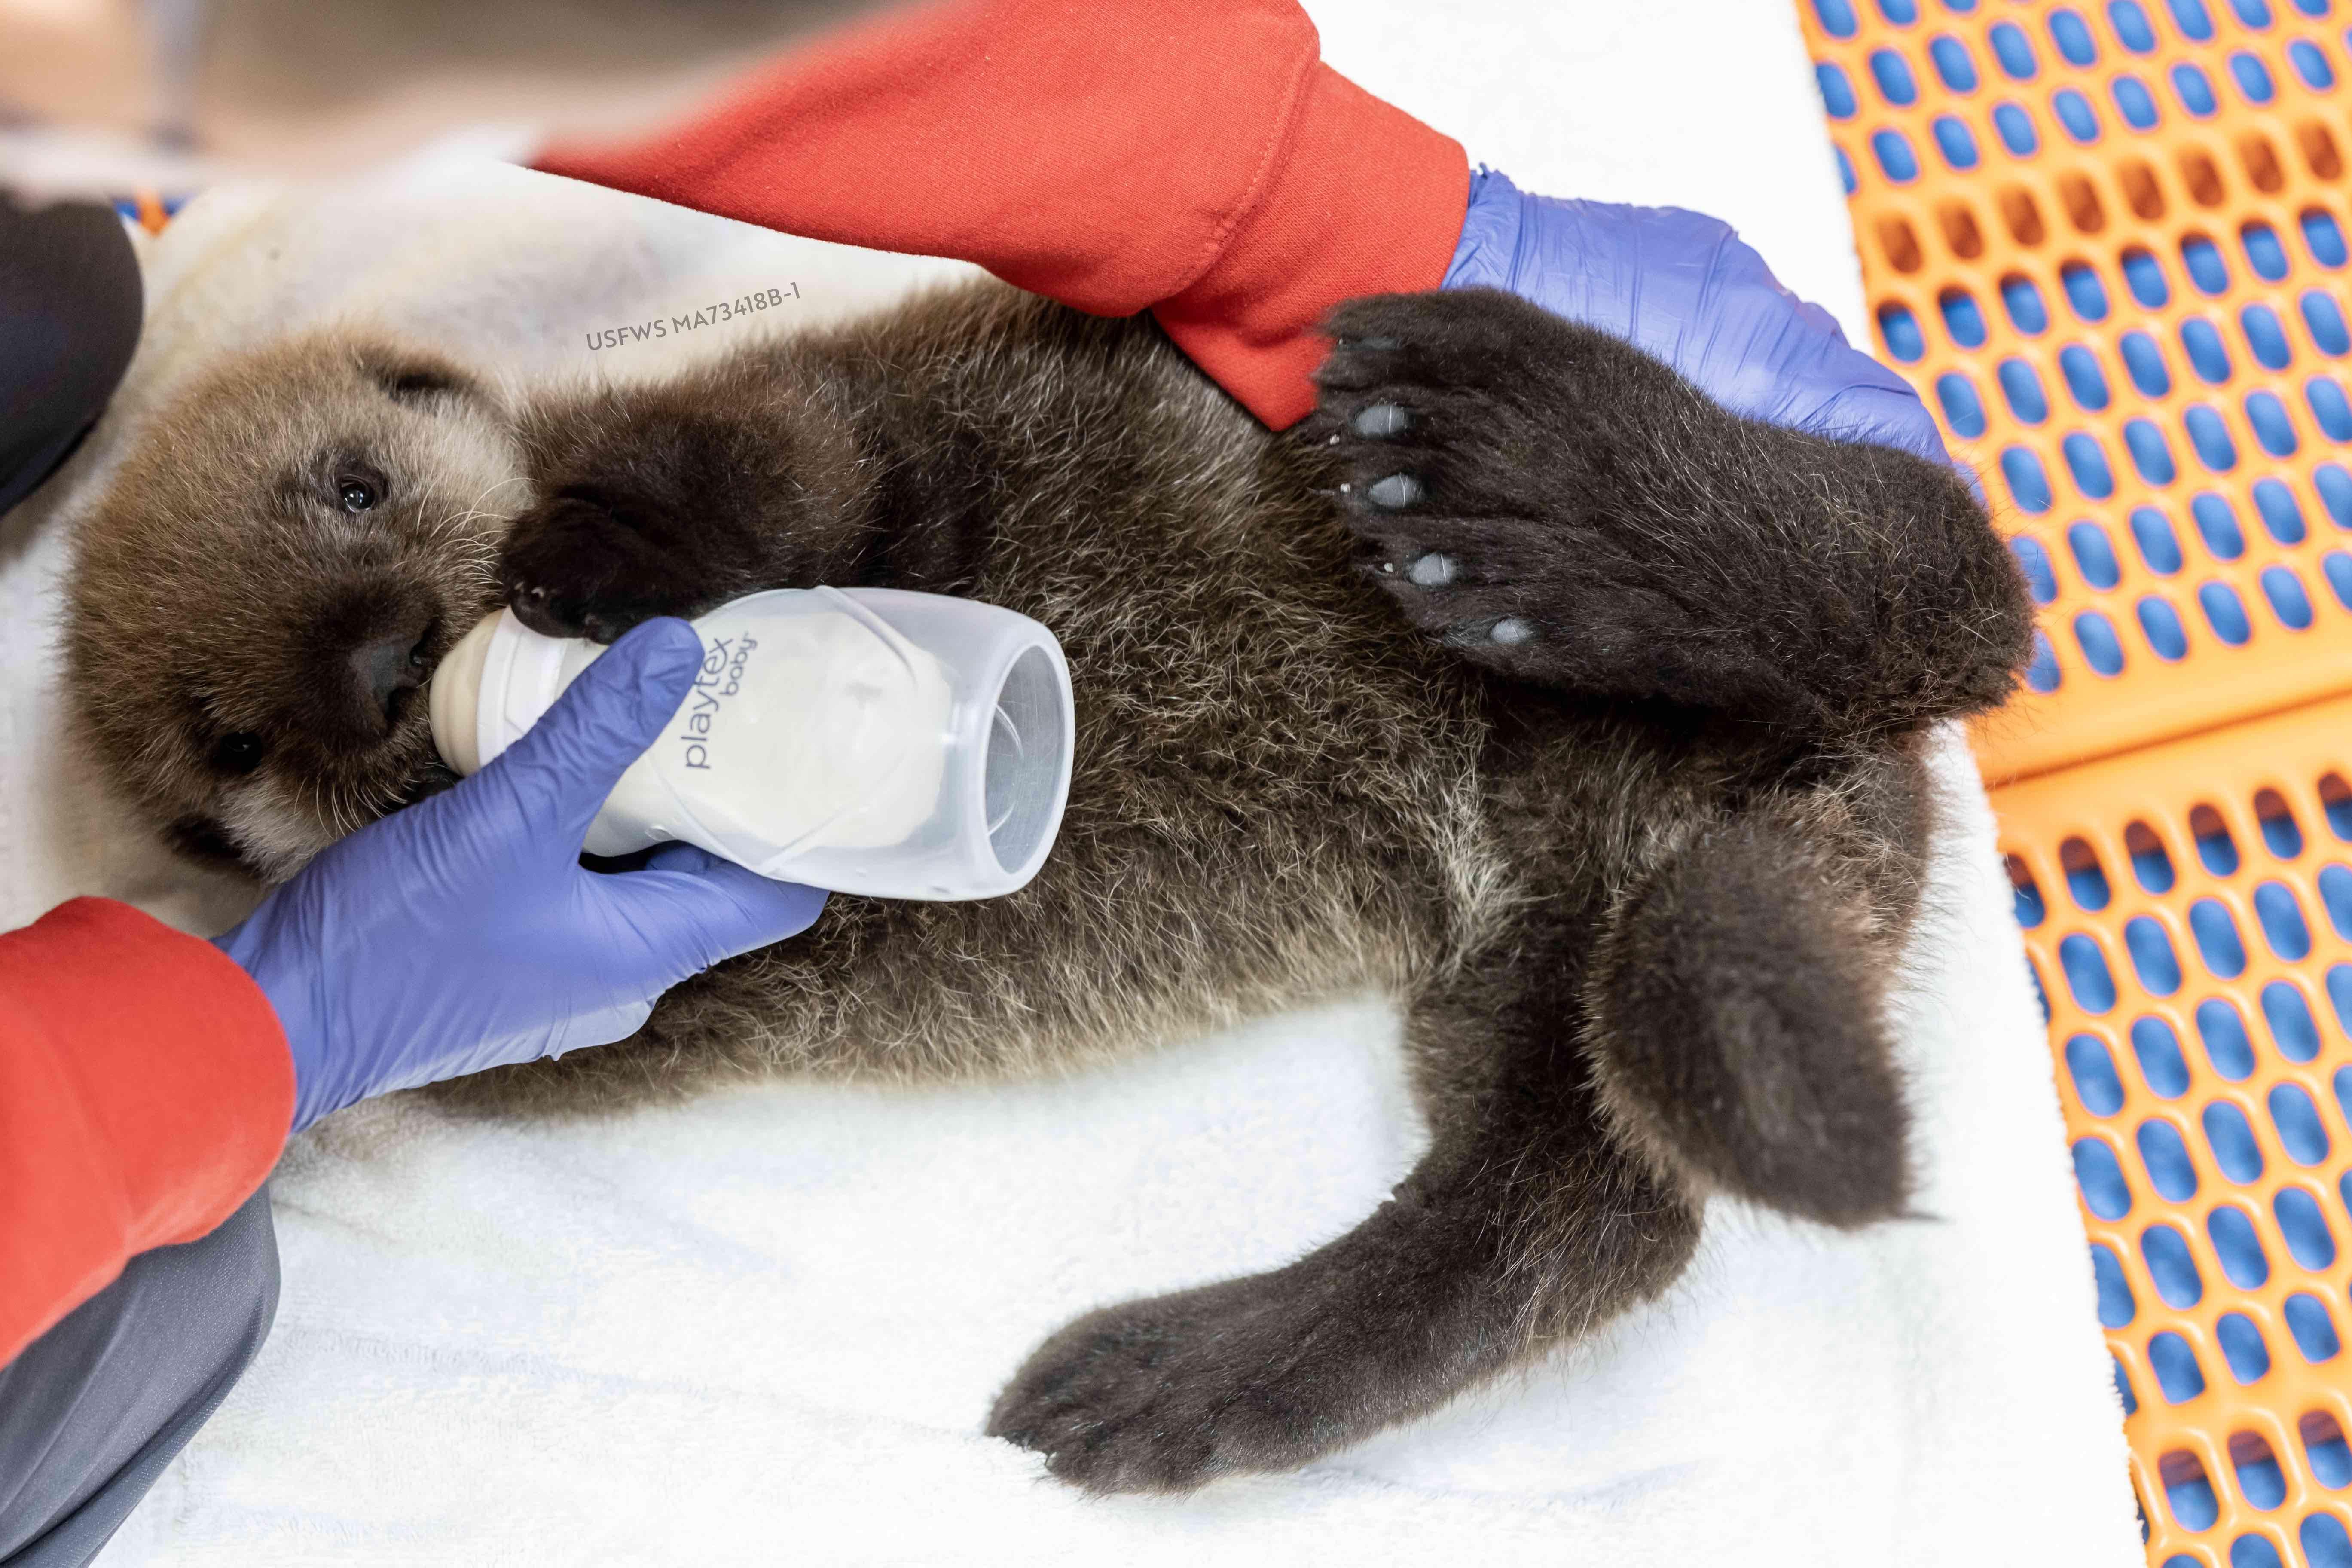 Otter pups are totally reliant on their mothers and require around-the-clock care, including feedings, when rescued. (Brenna Hernandez / Shedd Aquarium)